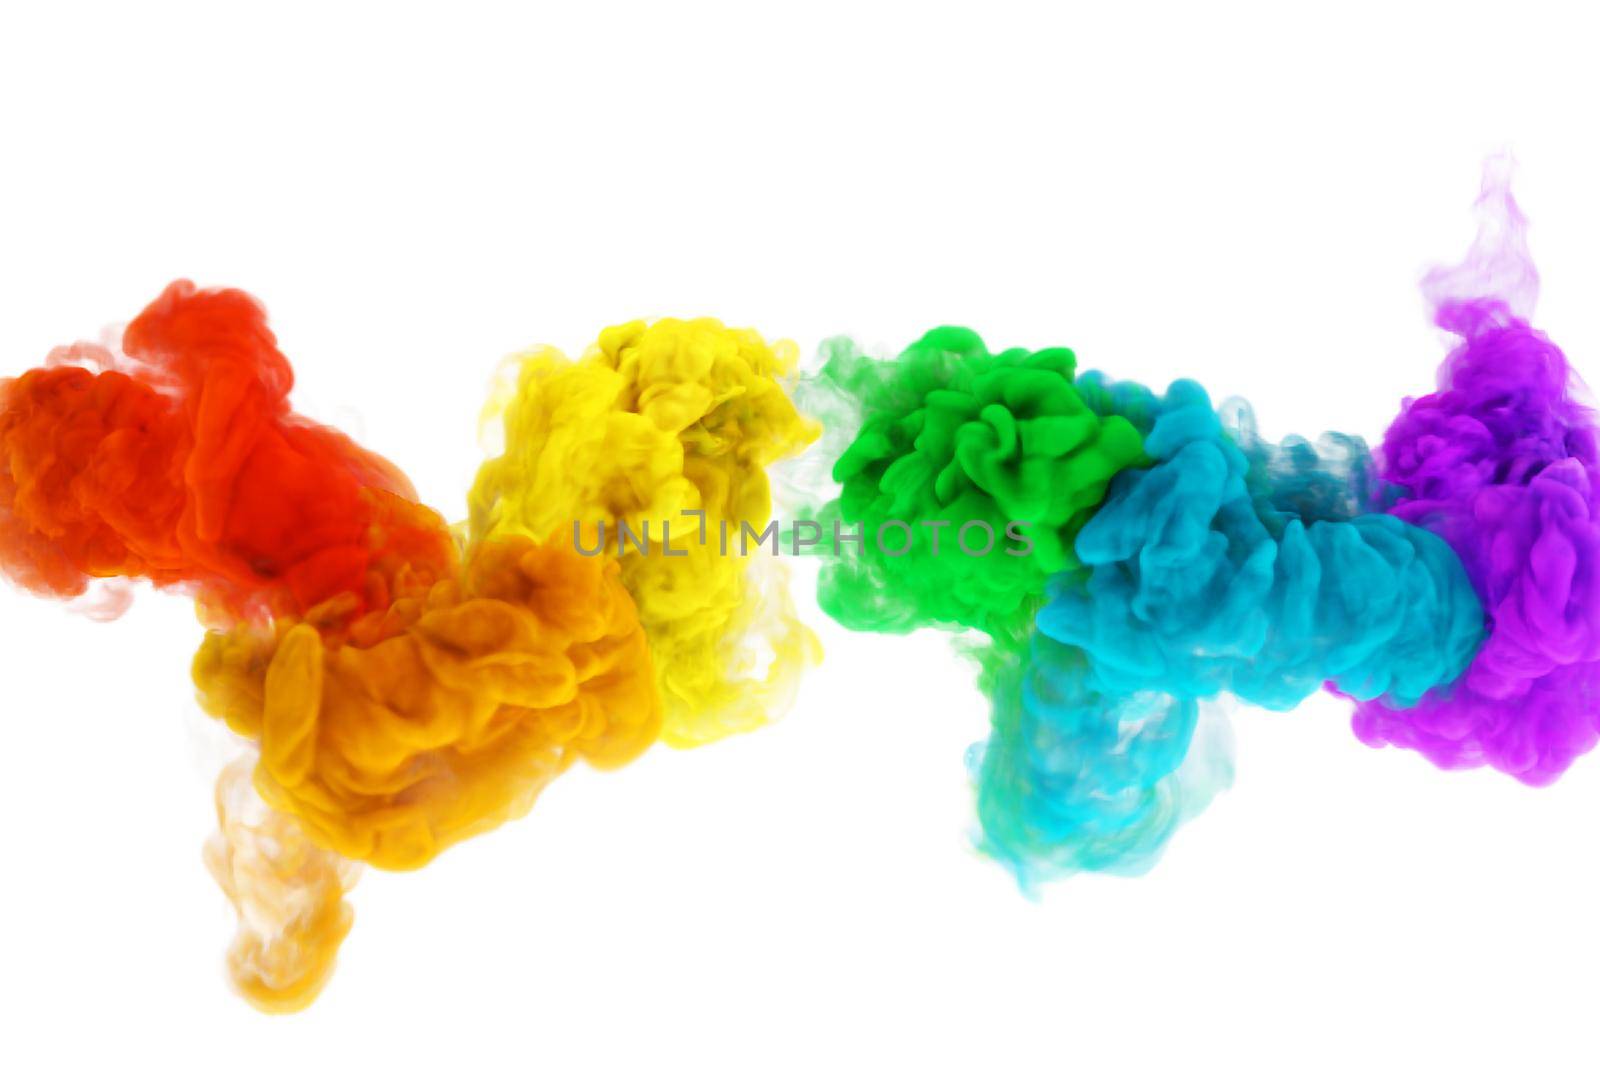 Rainbow color fantasy smoke puffs or magic clouds in white background by Xeniasnowstorm